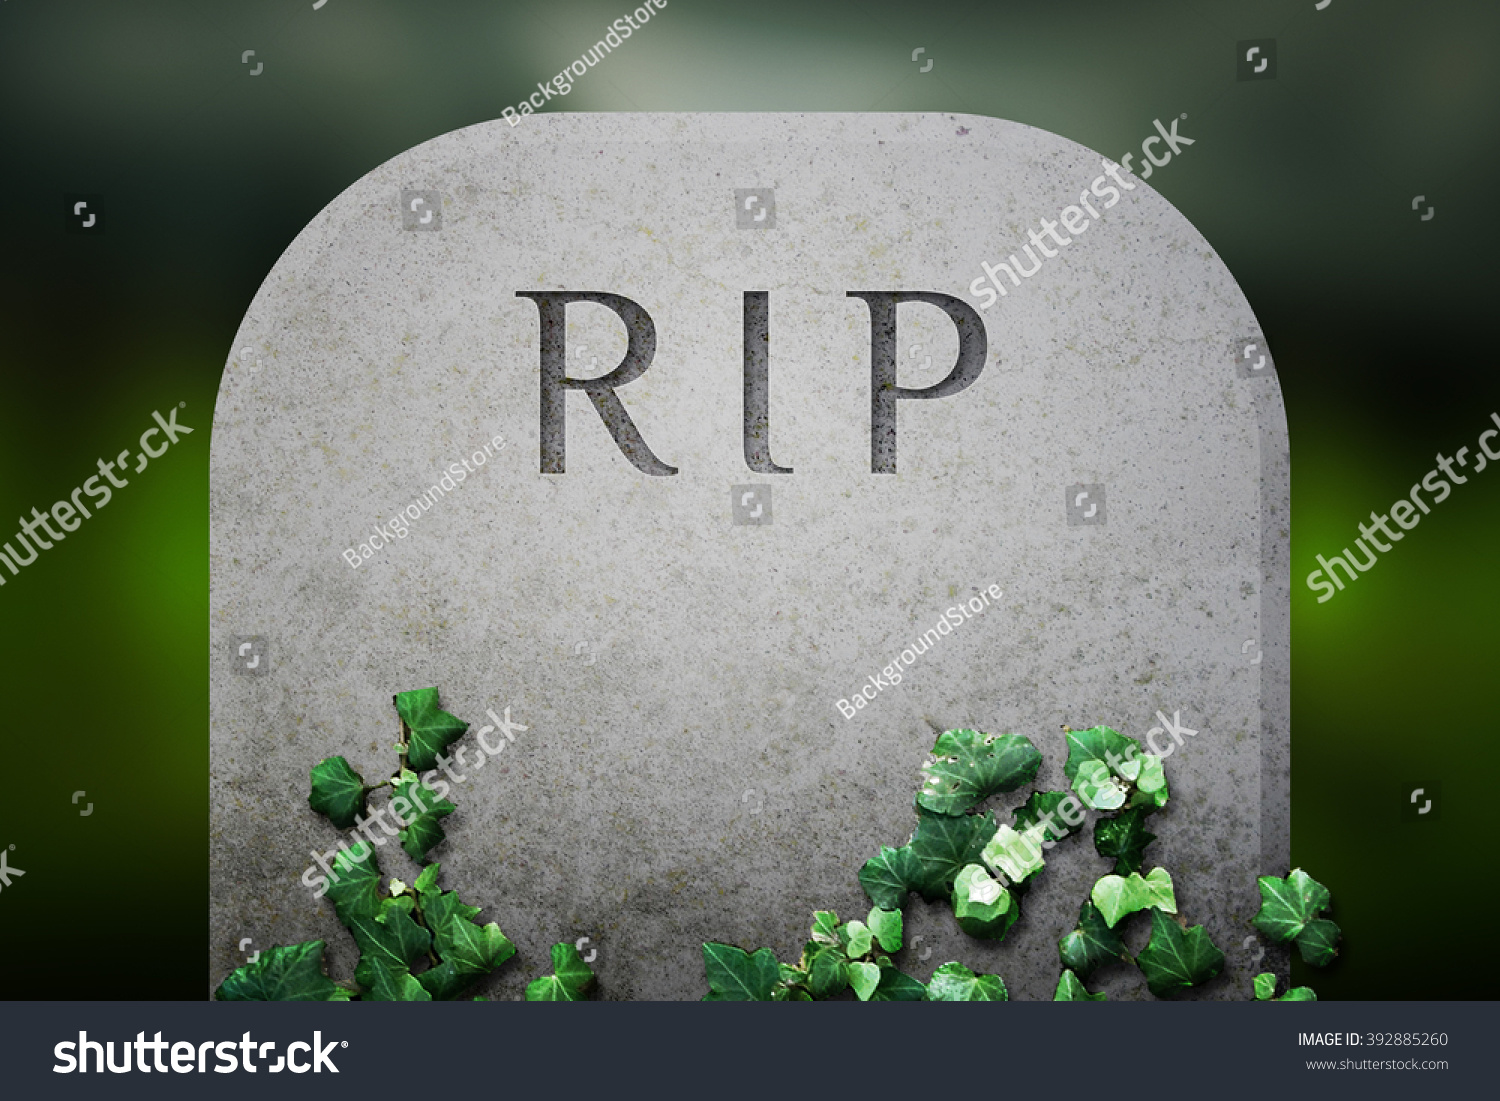 RIP on Grave Funeral Background #392885260